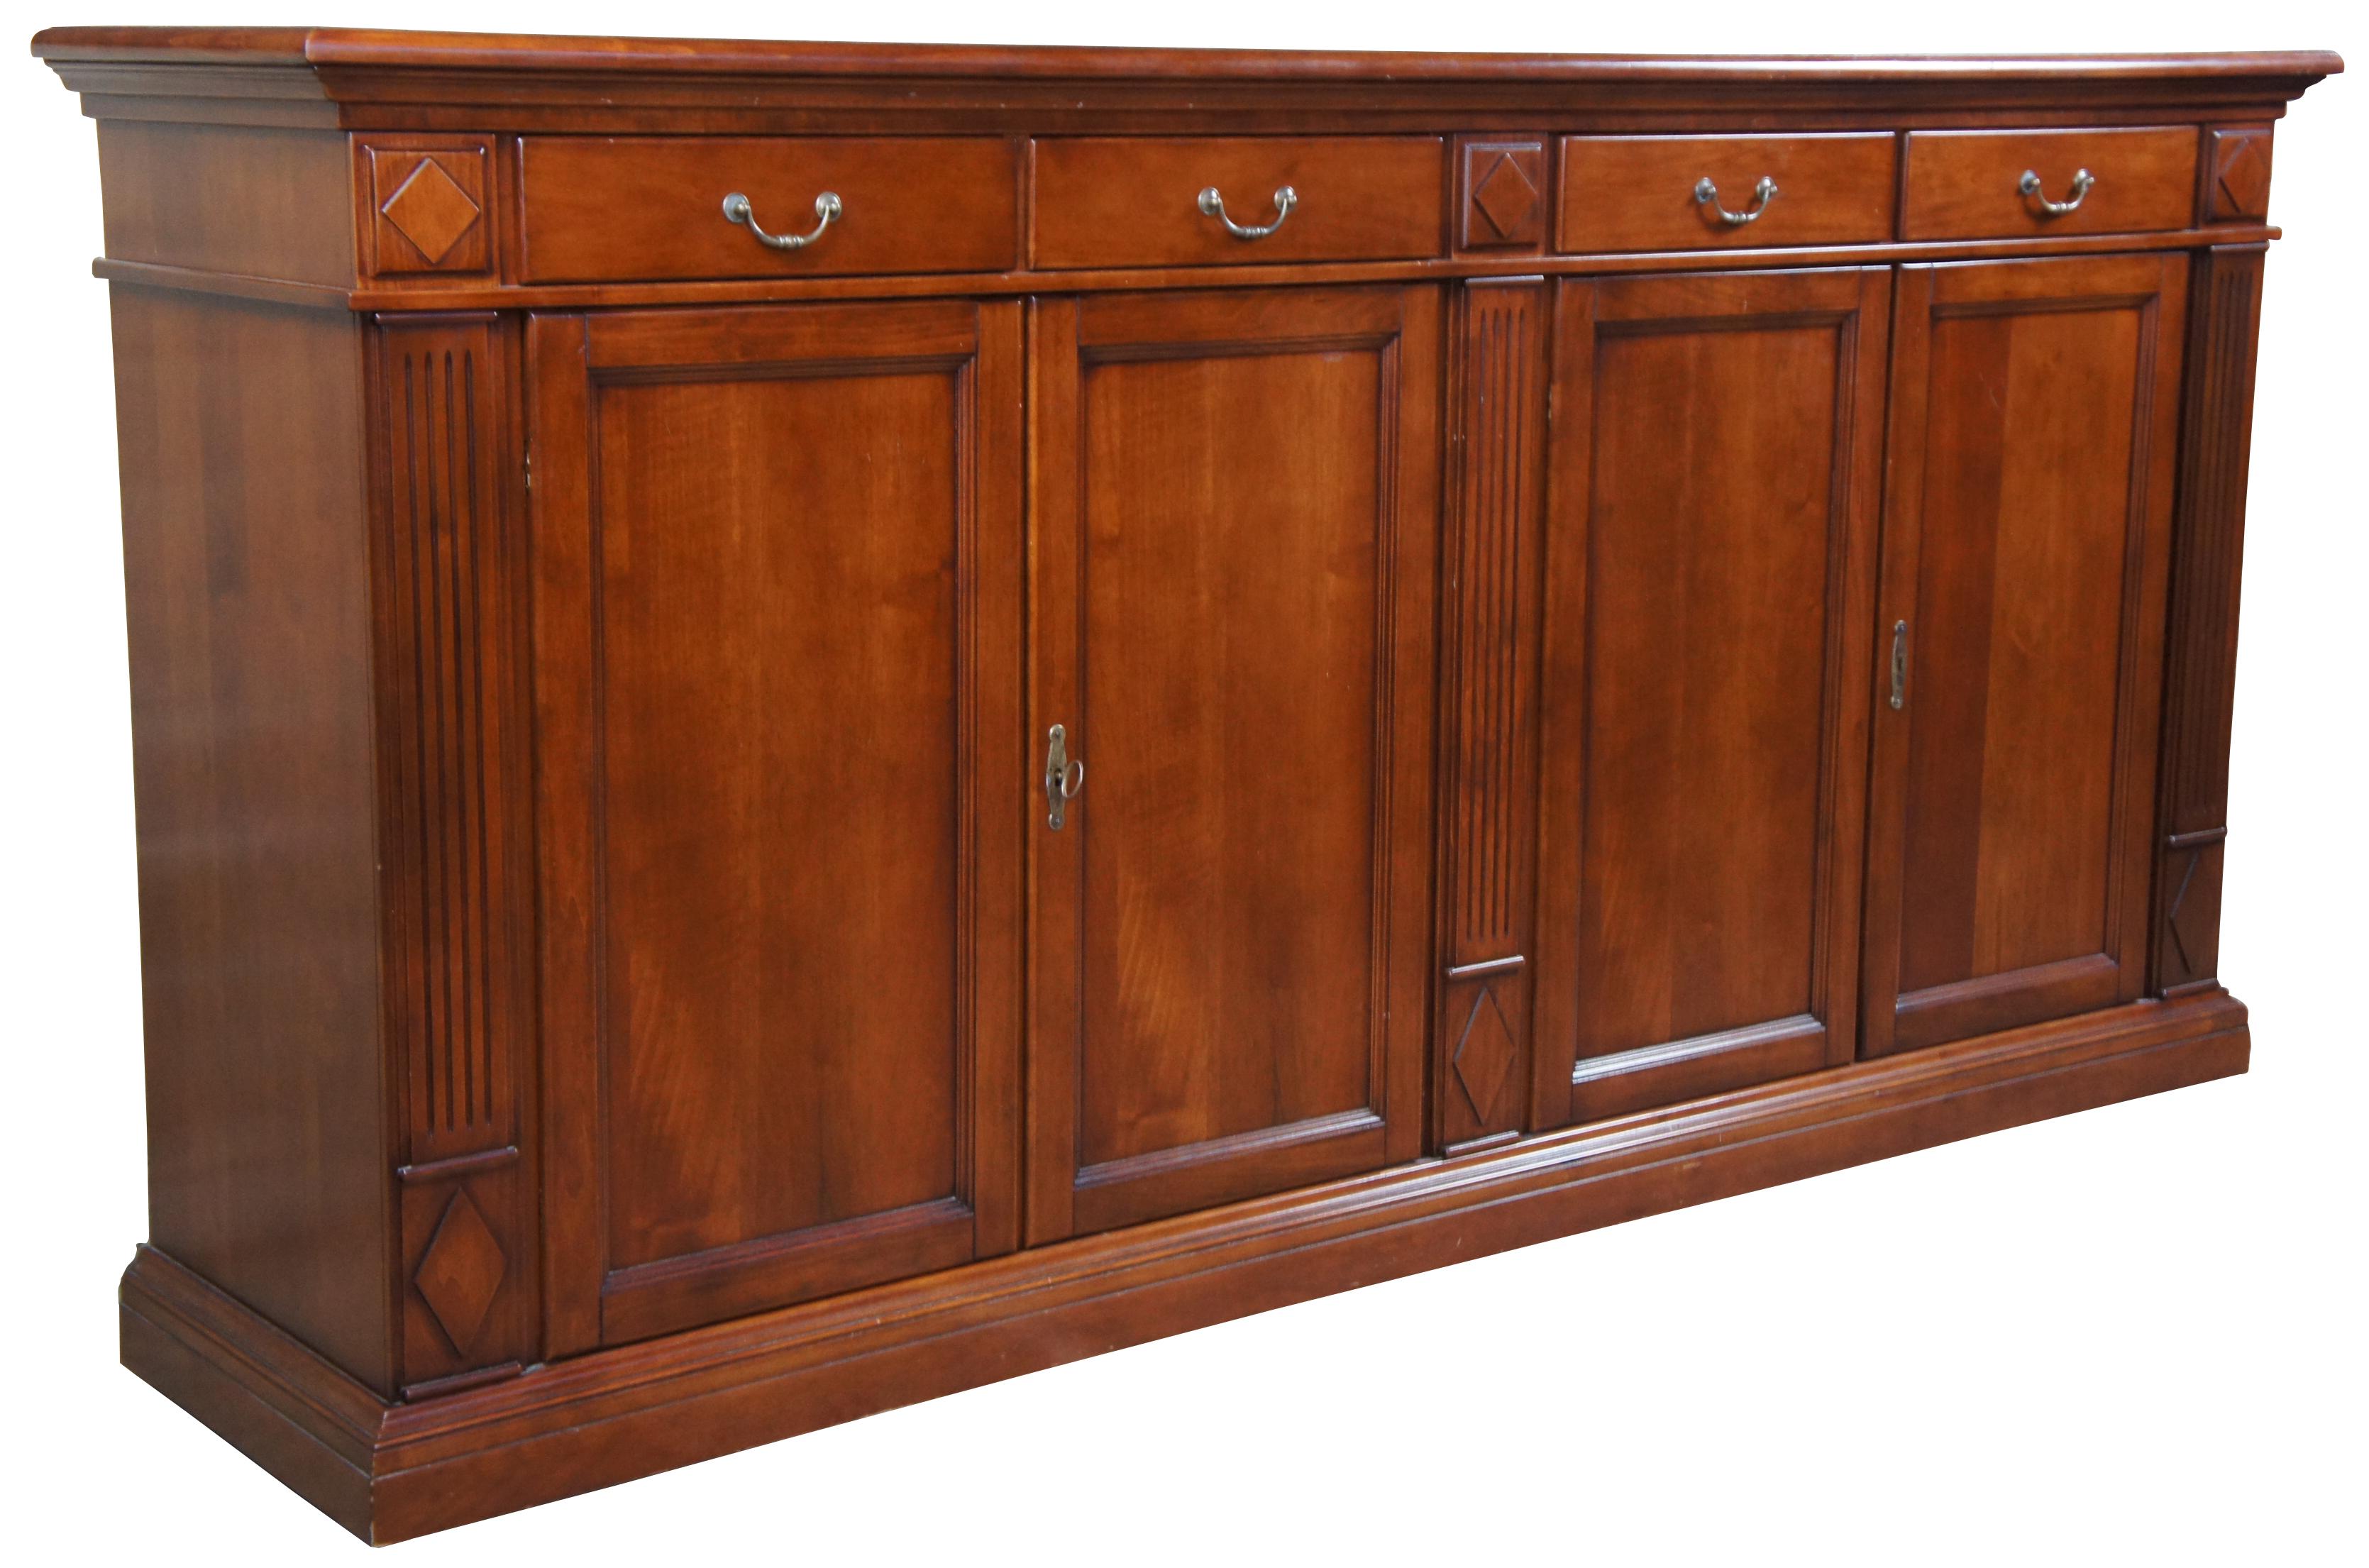 Italian made and traditional inspired cherry sideboard. Features a tall stature with four drawers over lower cabinets. Includes fluted columns between diamond pattern medallions. Could be used as a bookcase, bar back, media cabinet or entry, hallway